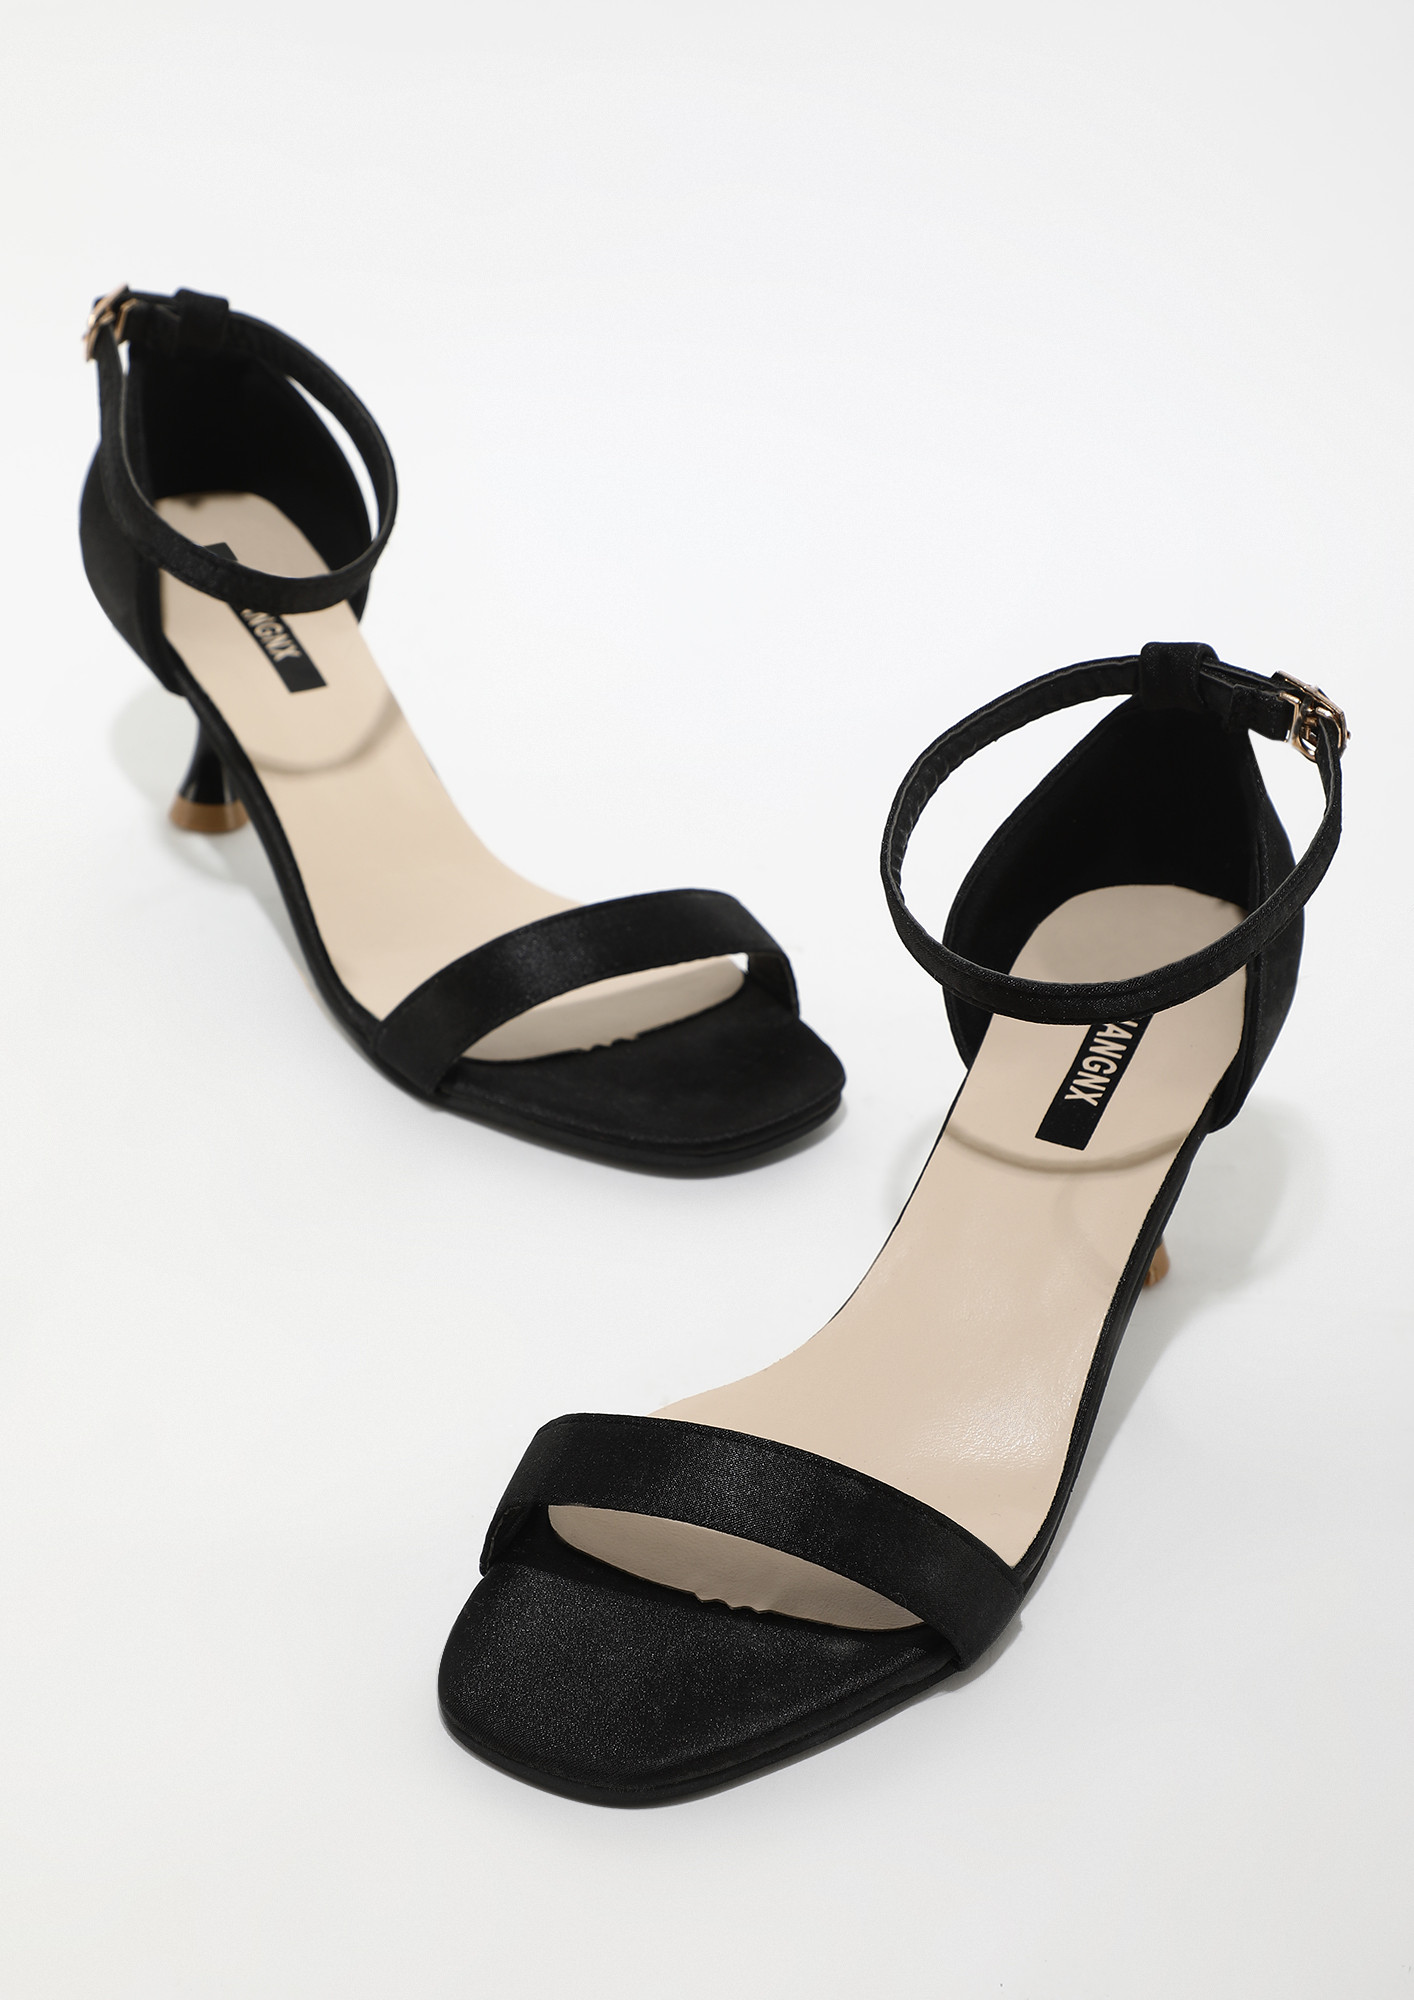 CONQUER THE WORLD WITH A CLICK BLACK HEELS